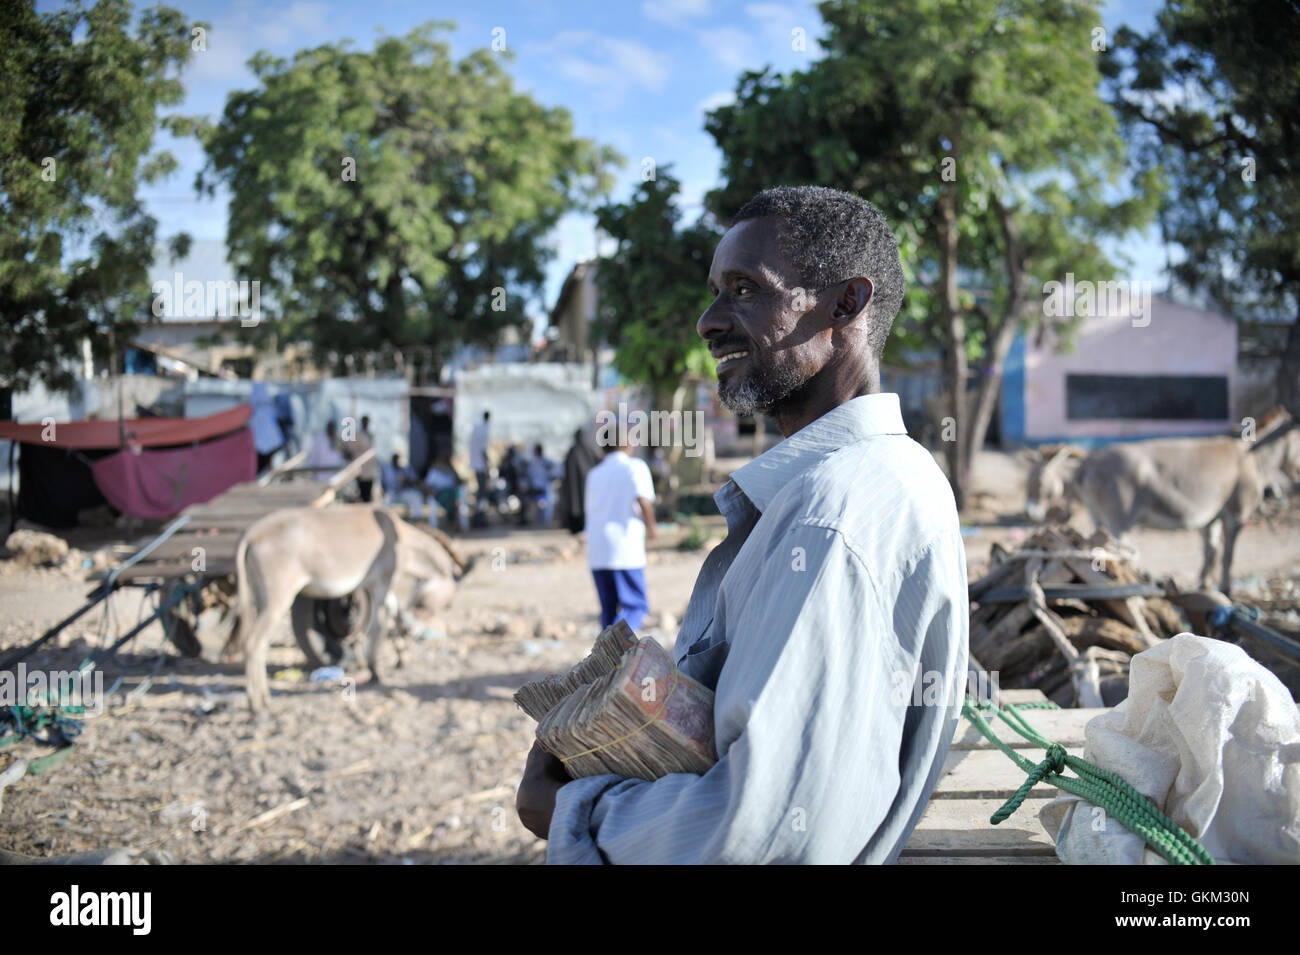 A Somali man holds the money he earned from selling goats at Bakara Animal Market in Mogadishu, Somalia, on April 13. Once notorious for being both the site of Black Hawk Down, in which 18 American soldiers were killed in 1993, and later as an al-Shabaab stronghold, Bakara market is now slowly losing its past notoriety and becoming better known for its thriving economy. In the district's animal market, thousands of goats are now brought each morning, where they are sold on to later be slaughtered for their meat. AU UN IST PHOTO / TOBIN JONES. Stock Photo